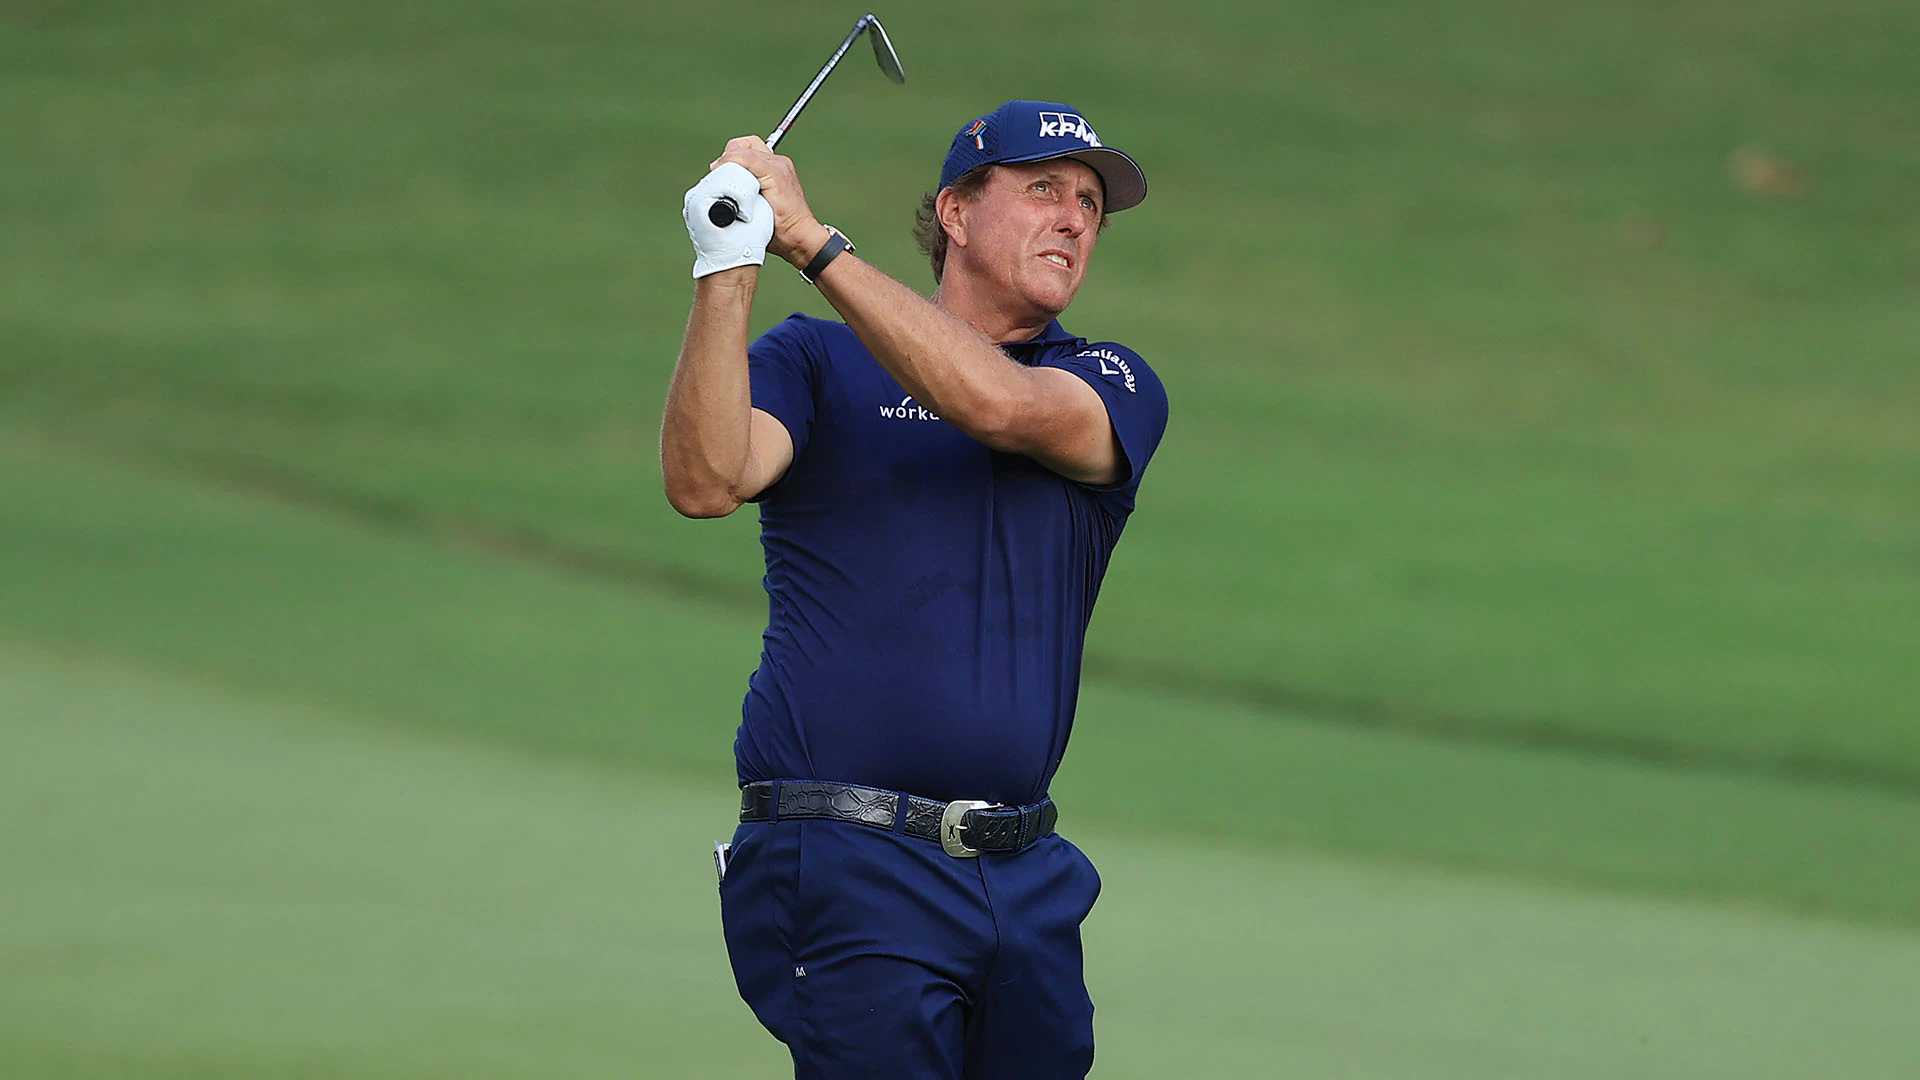 Phil Mickelson looking for ‘hot round’ Saturday in Memphis